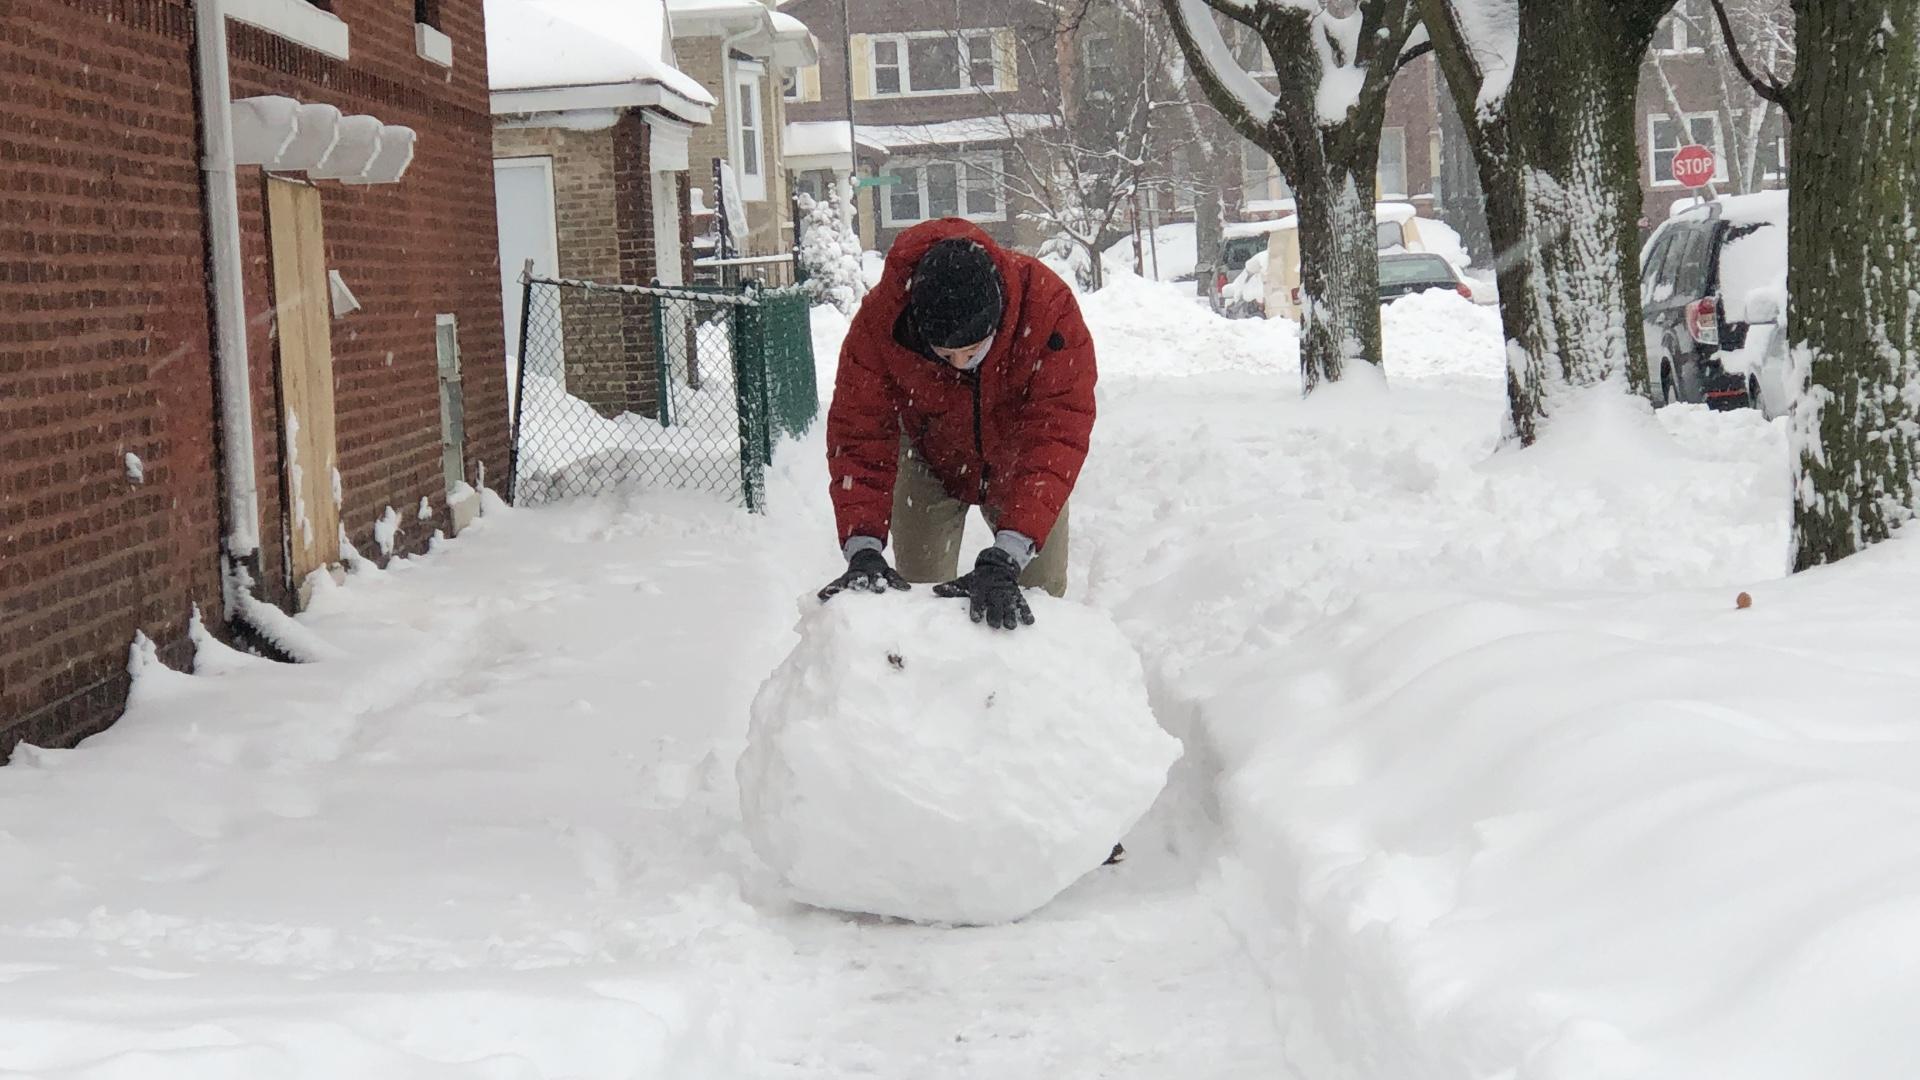 Lake Effect Snow, Storm System Could Blanket Chicago in More Than a